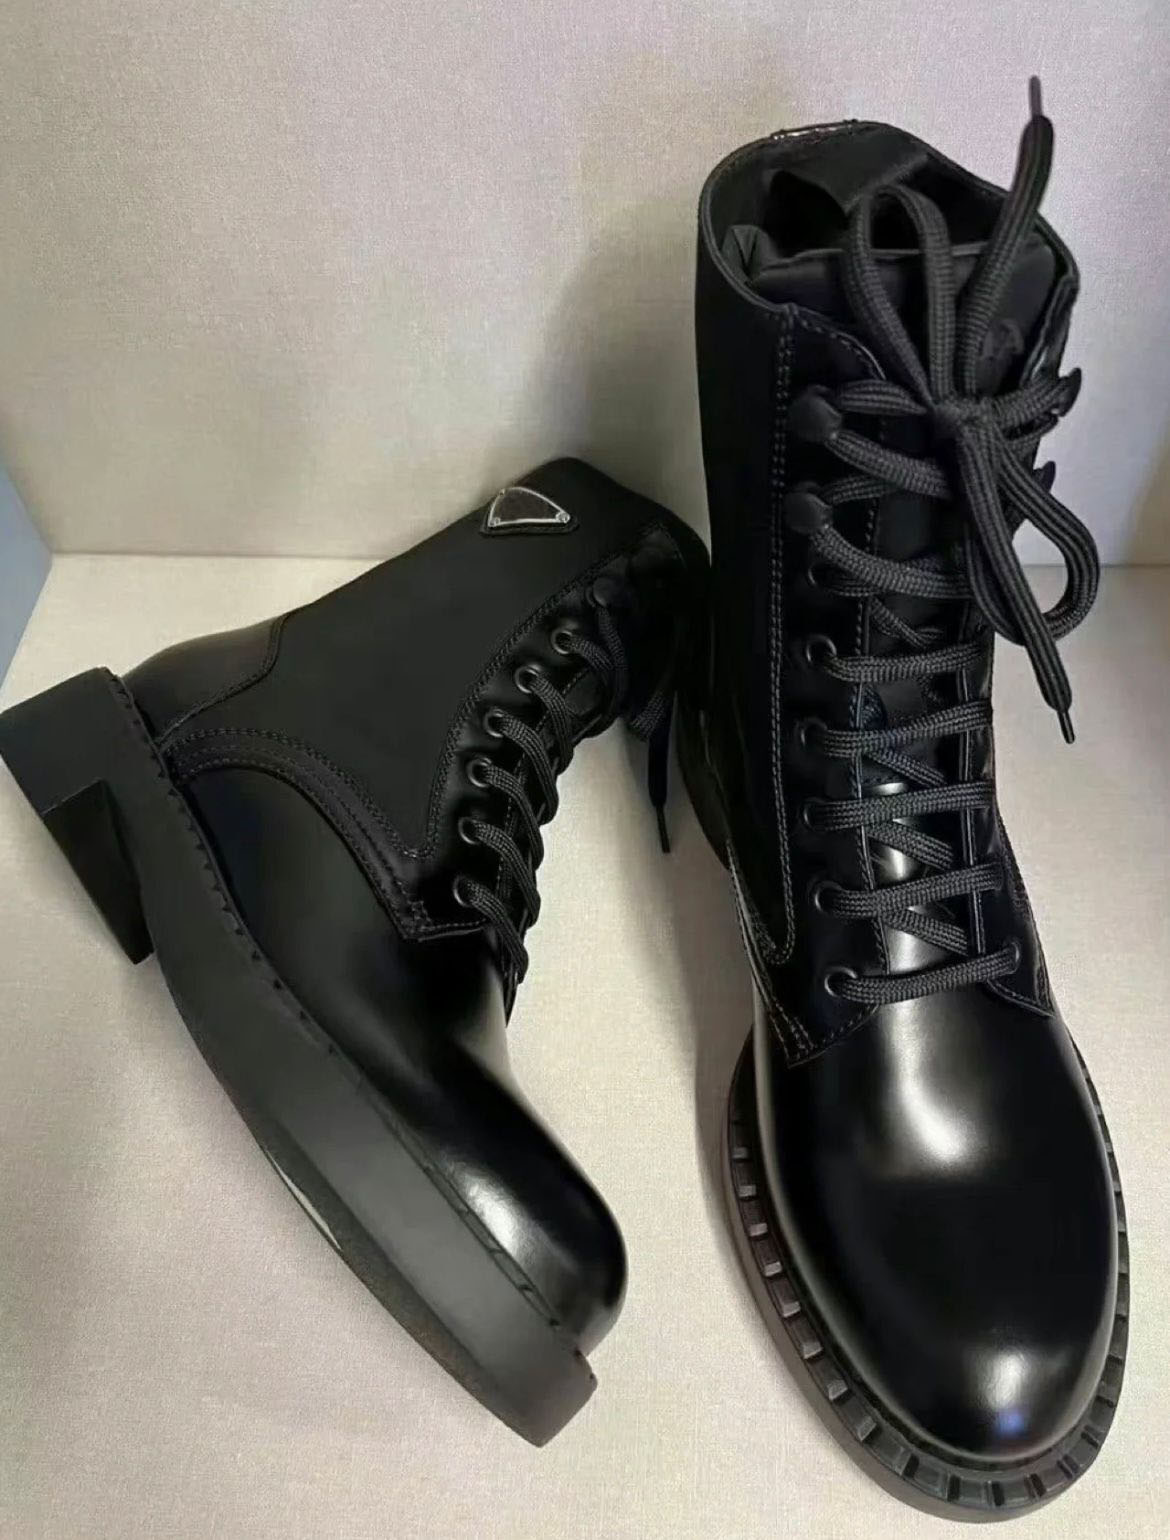 

Winter Fashion Brands Brushed Leather Re-Nylon Ankle Boots Black Recycled Enameled Metal Triangle Combat Boot Chunky Lug Sole Platform Motorcycle Booties